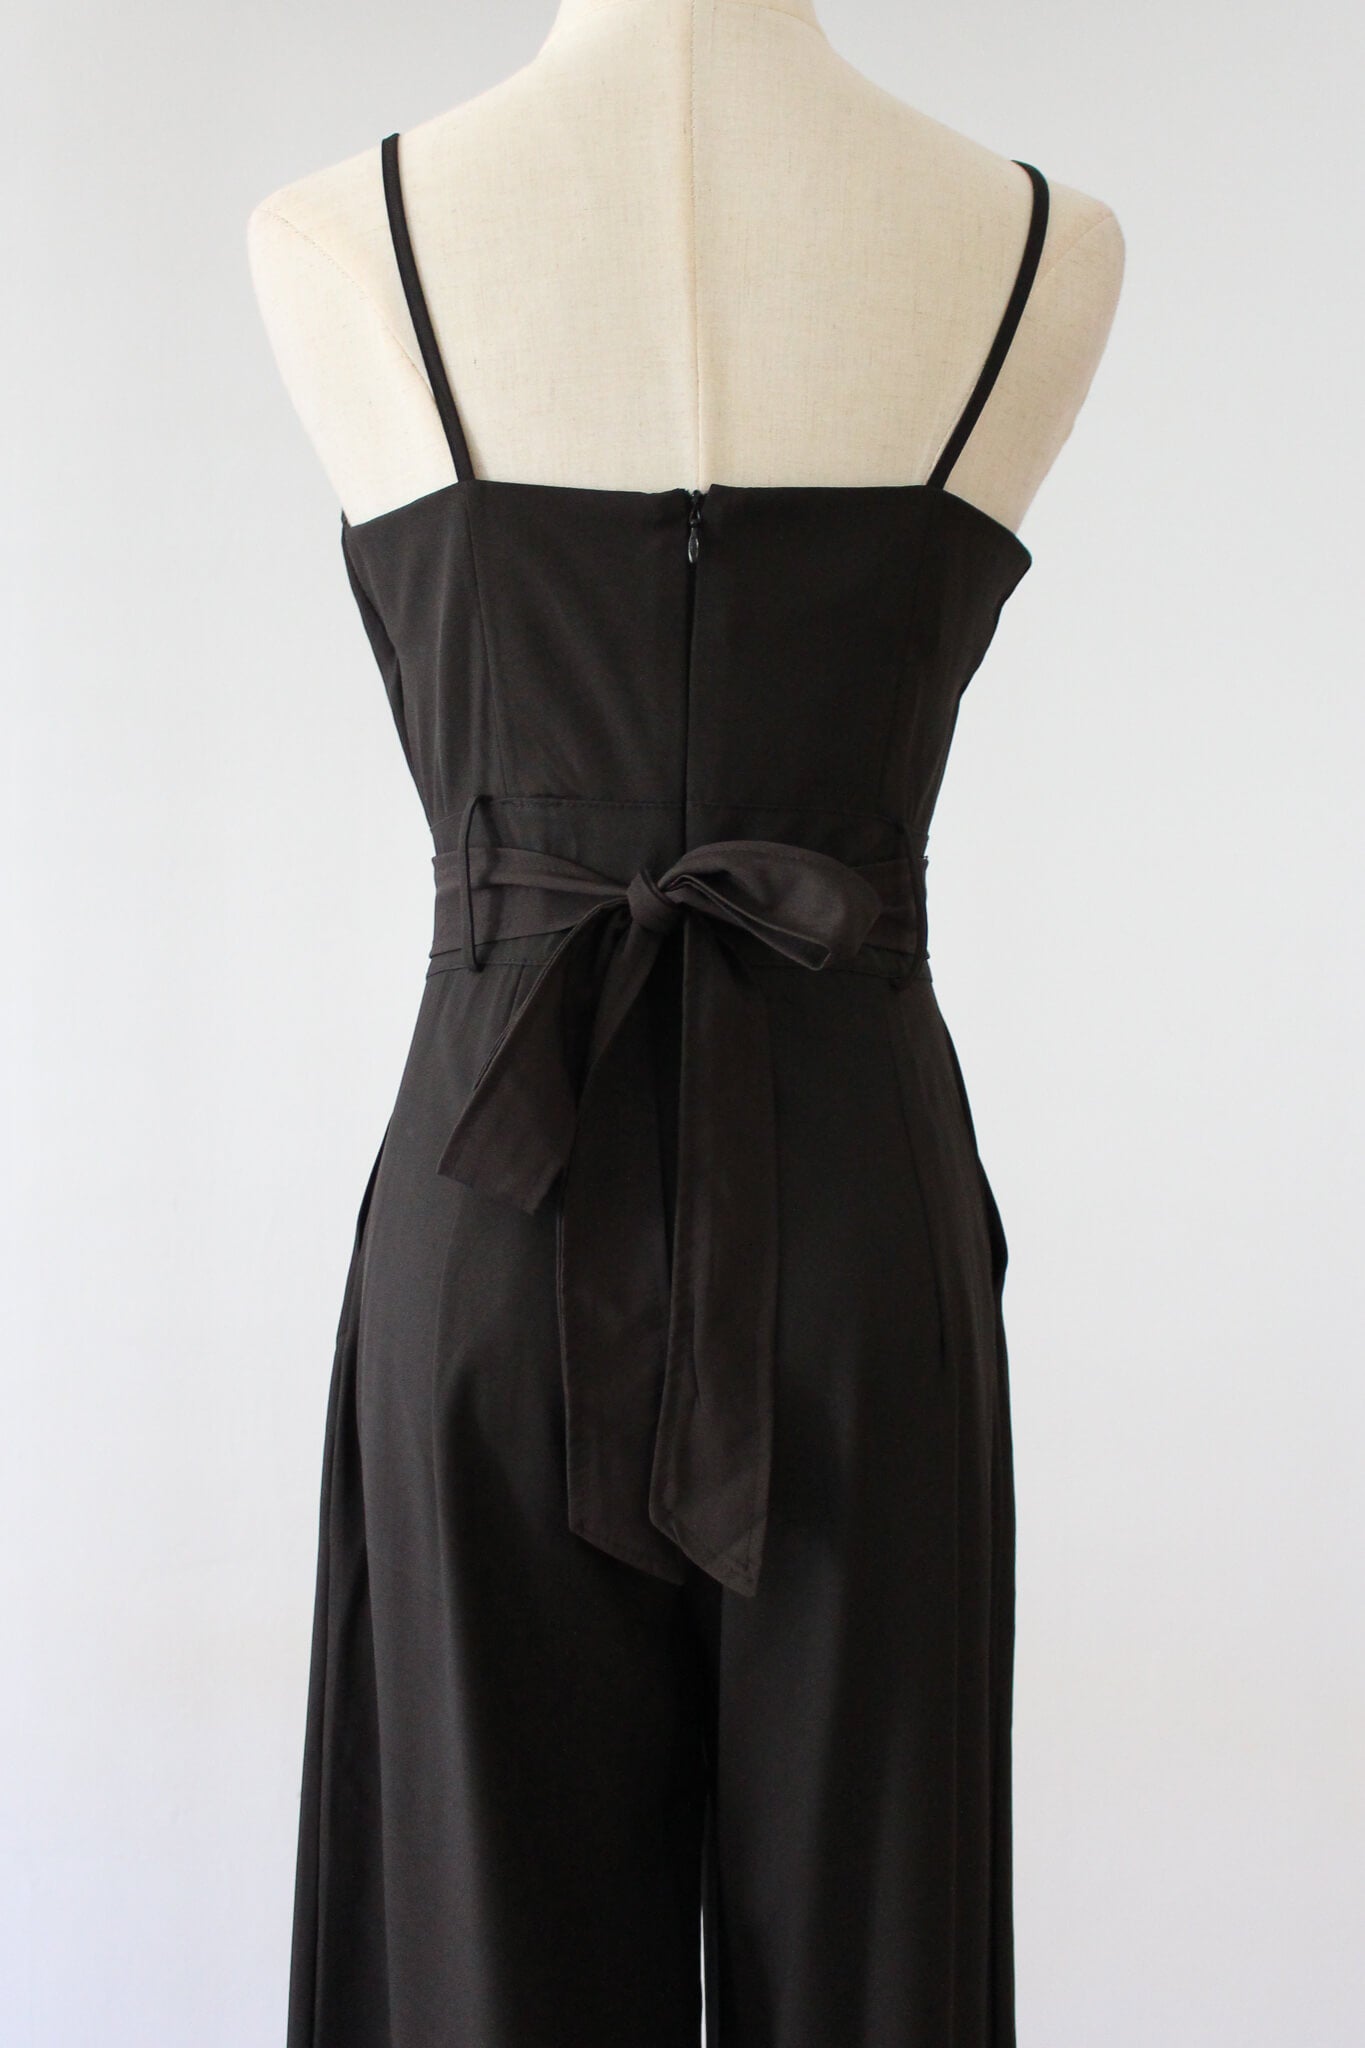 Belted Jumpsuit with small cut-out. Soft thin material perfect for summer. 